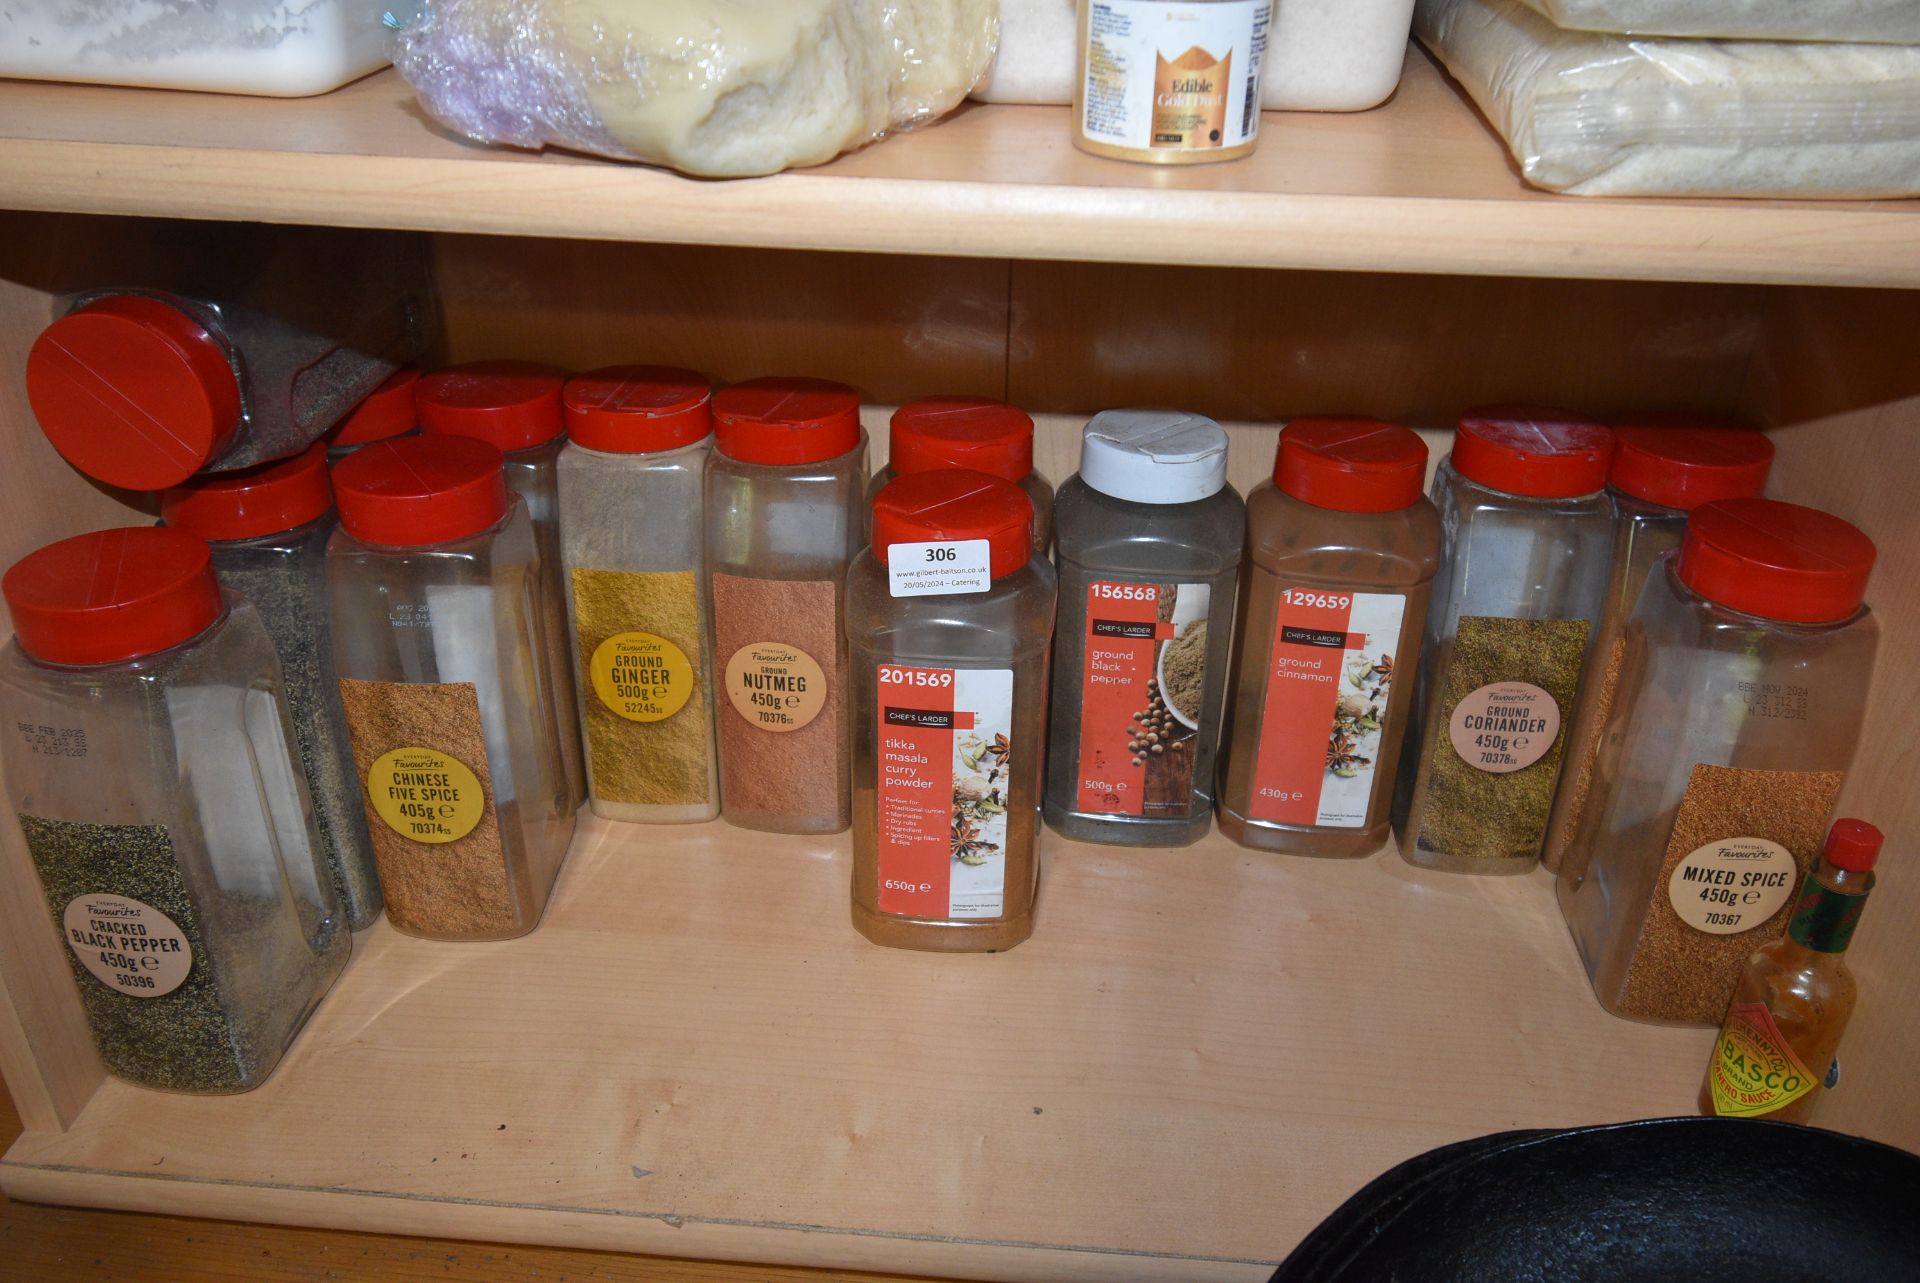 Contents of Shelf to Include Assorted Spices Including Black Pepper, Nutmeg, Ginger, etc.